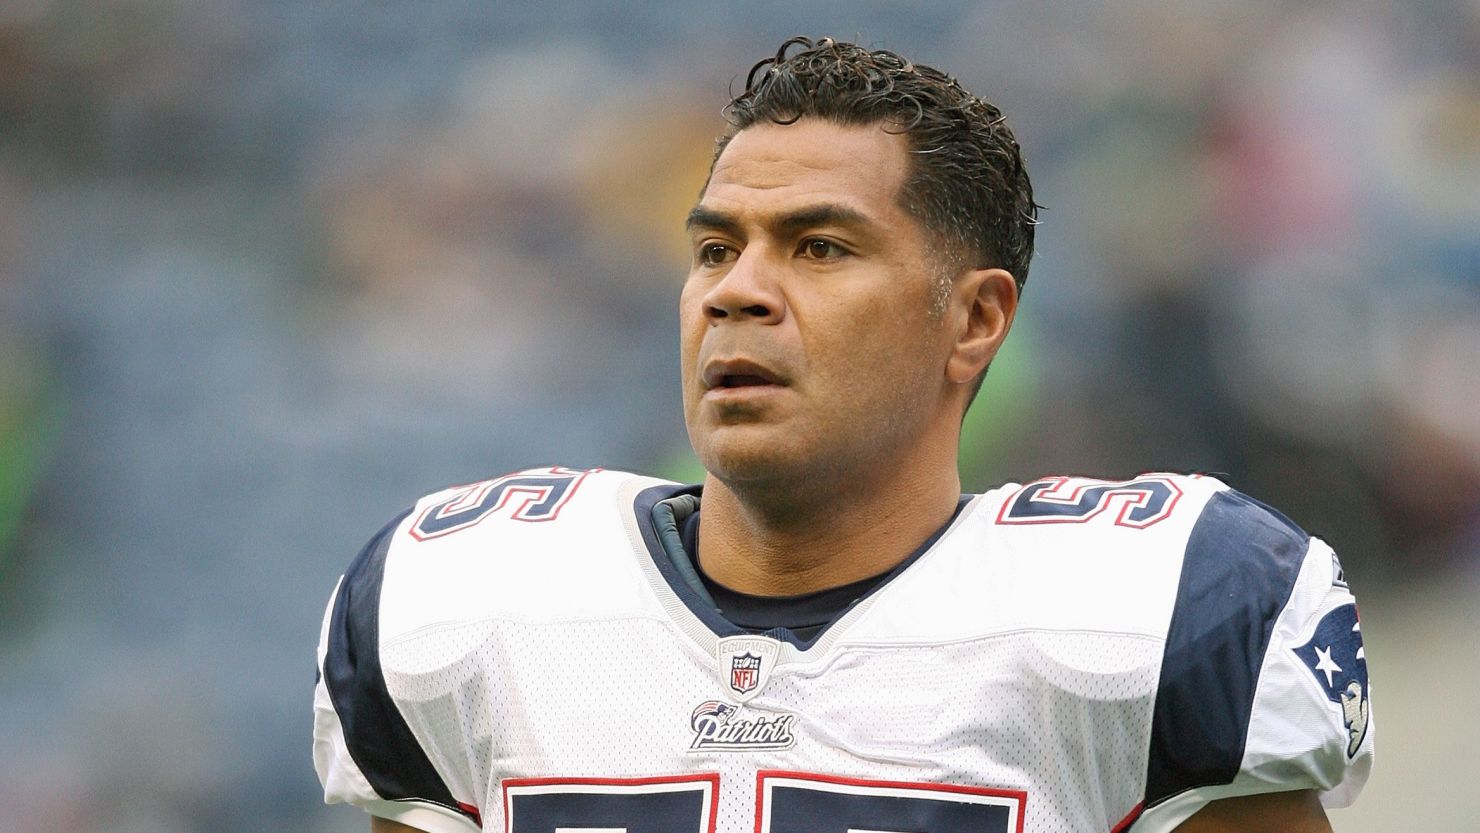 Don Pherson says his friend Junior Seau (above) was in pain but didn't know how to ask for help.